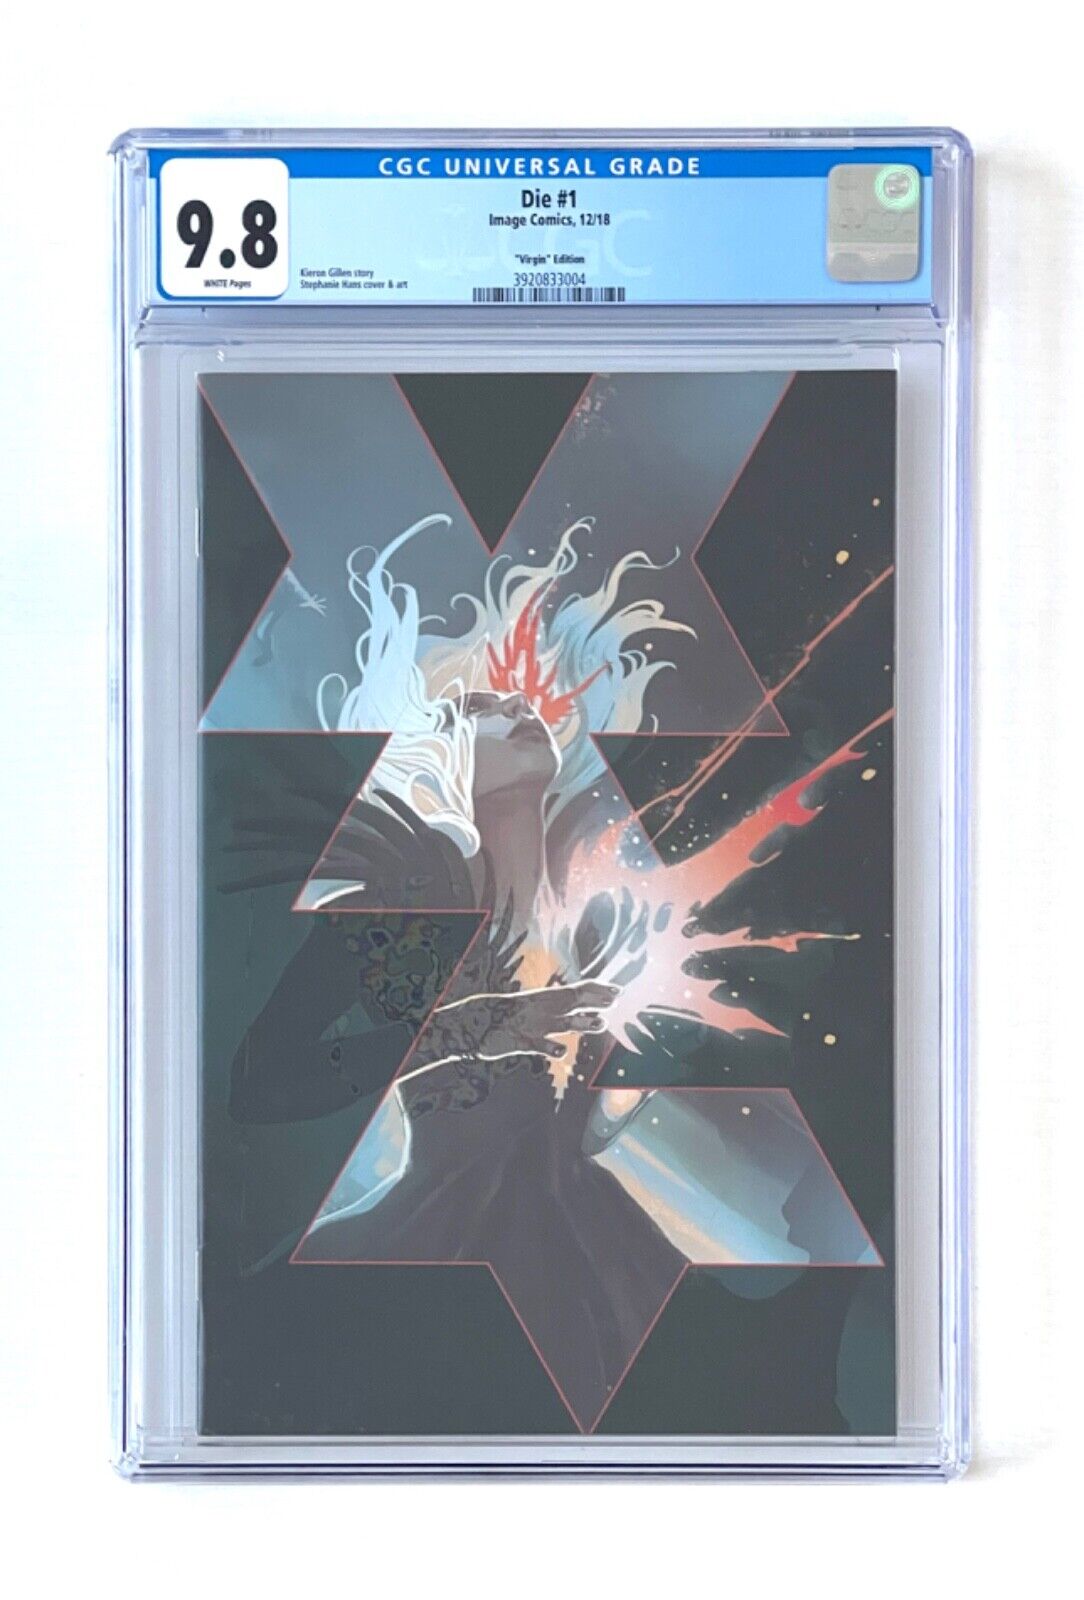 Die #1 CGC 9.8 Stephanie Hans cover. One of 800. Very low census Virgin edition